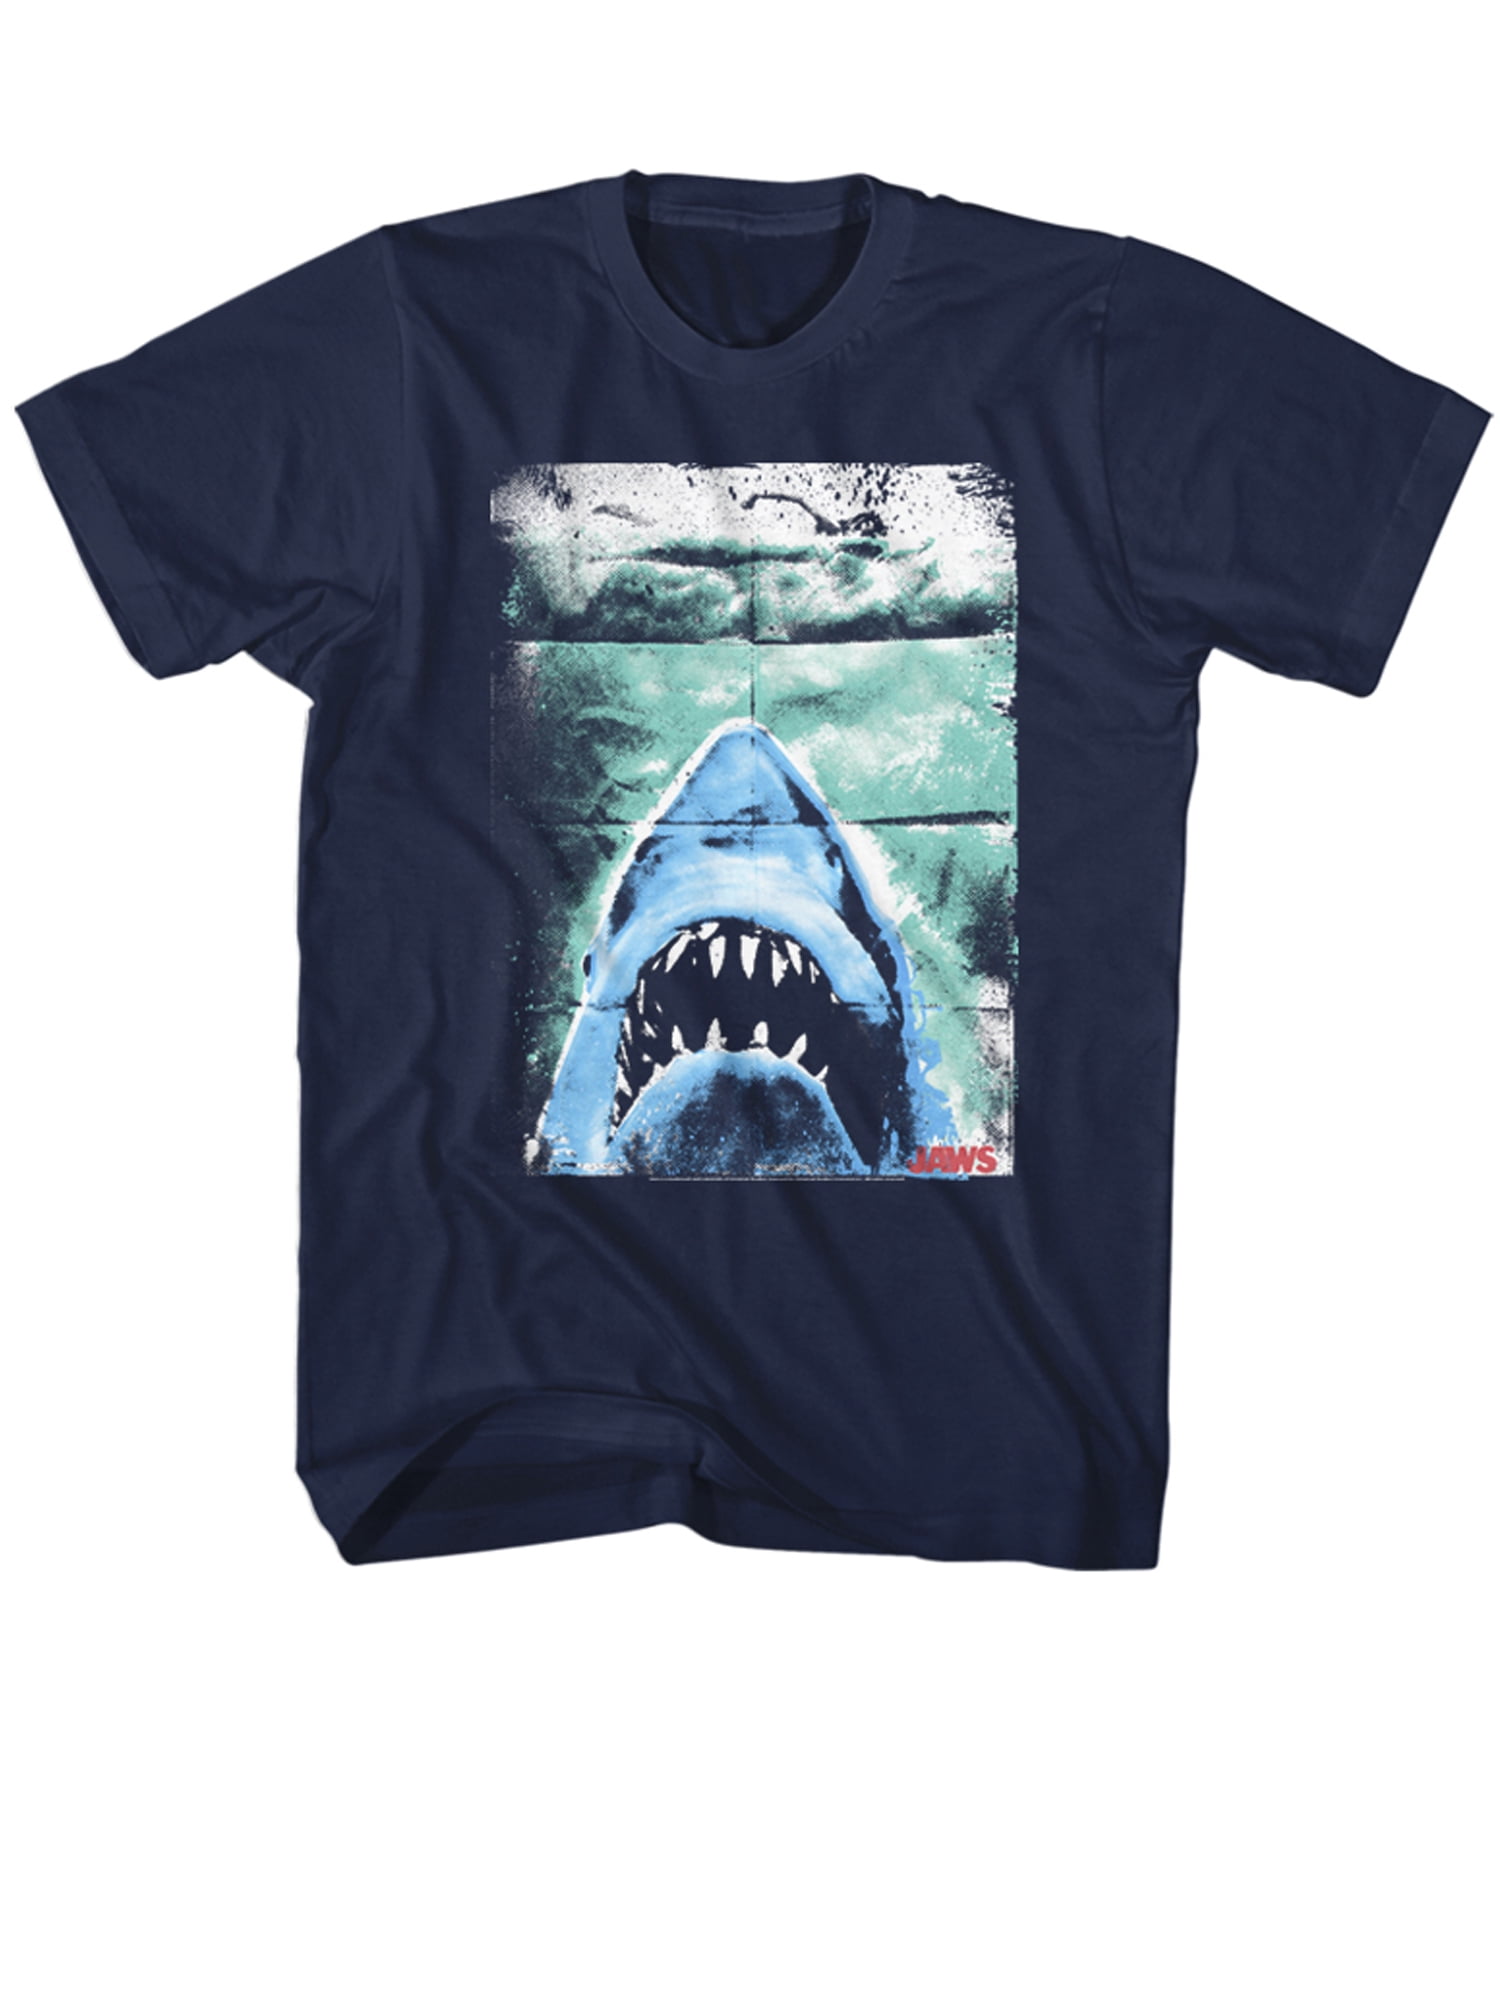 Jaws Movie Poster WATER CIRCLE Licensed BOYS & GIRLS T-Shirt S-XL